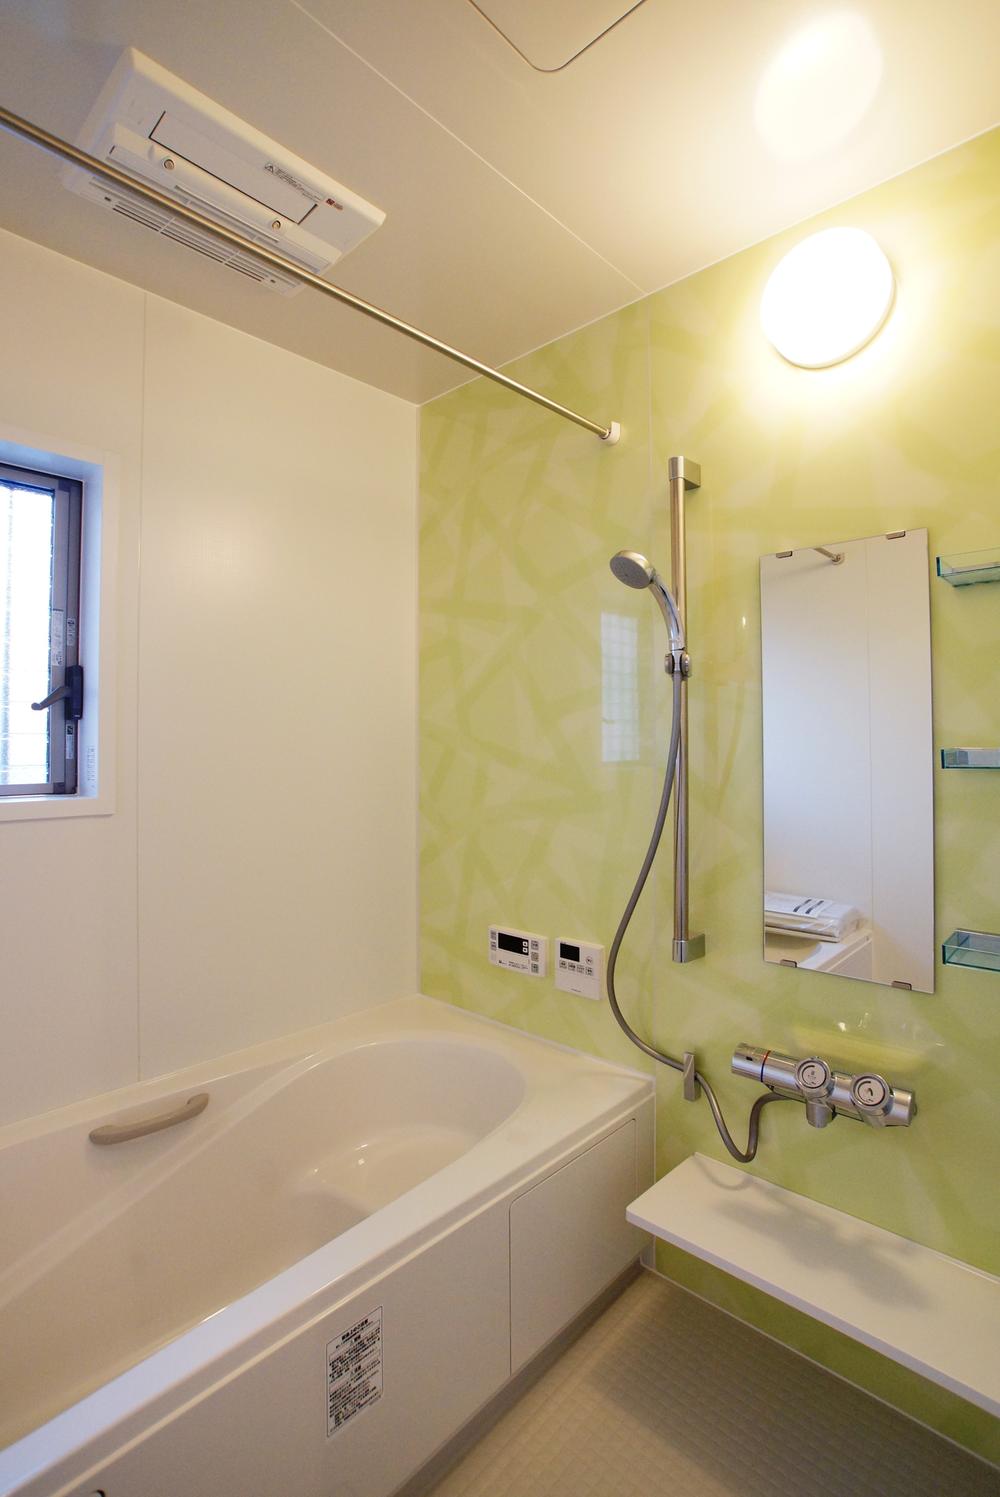 Bathroom. Bathroom There is room in the 1 pyeong type! Since the spacious and tired of the day stretched out legs in the bath of a with a refreshing mist sauna, Also your skin purpuric rice cake rice cake